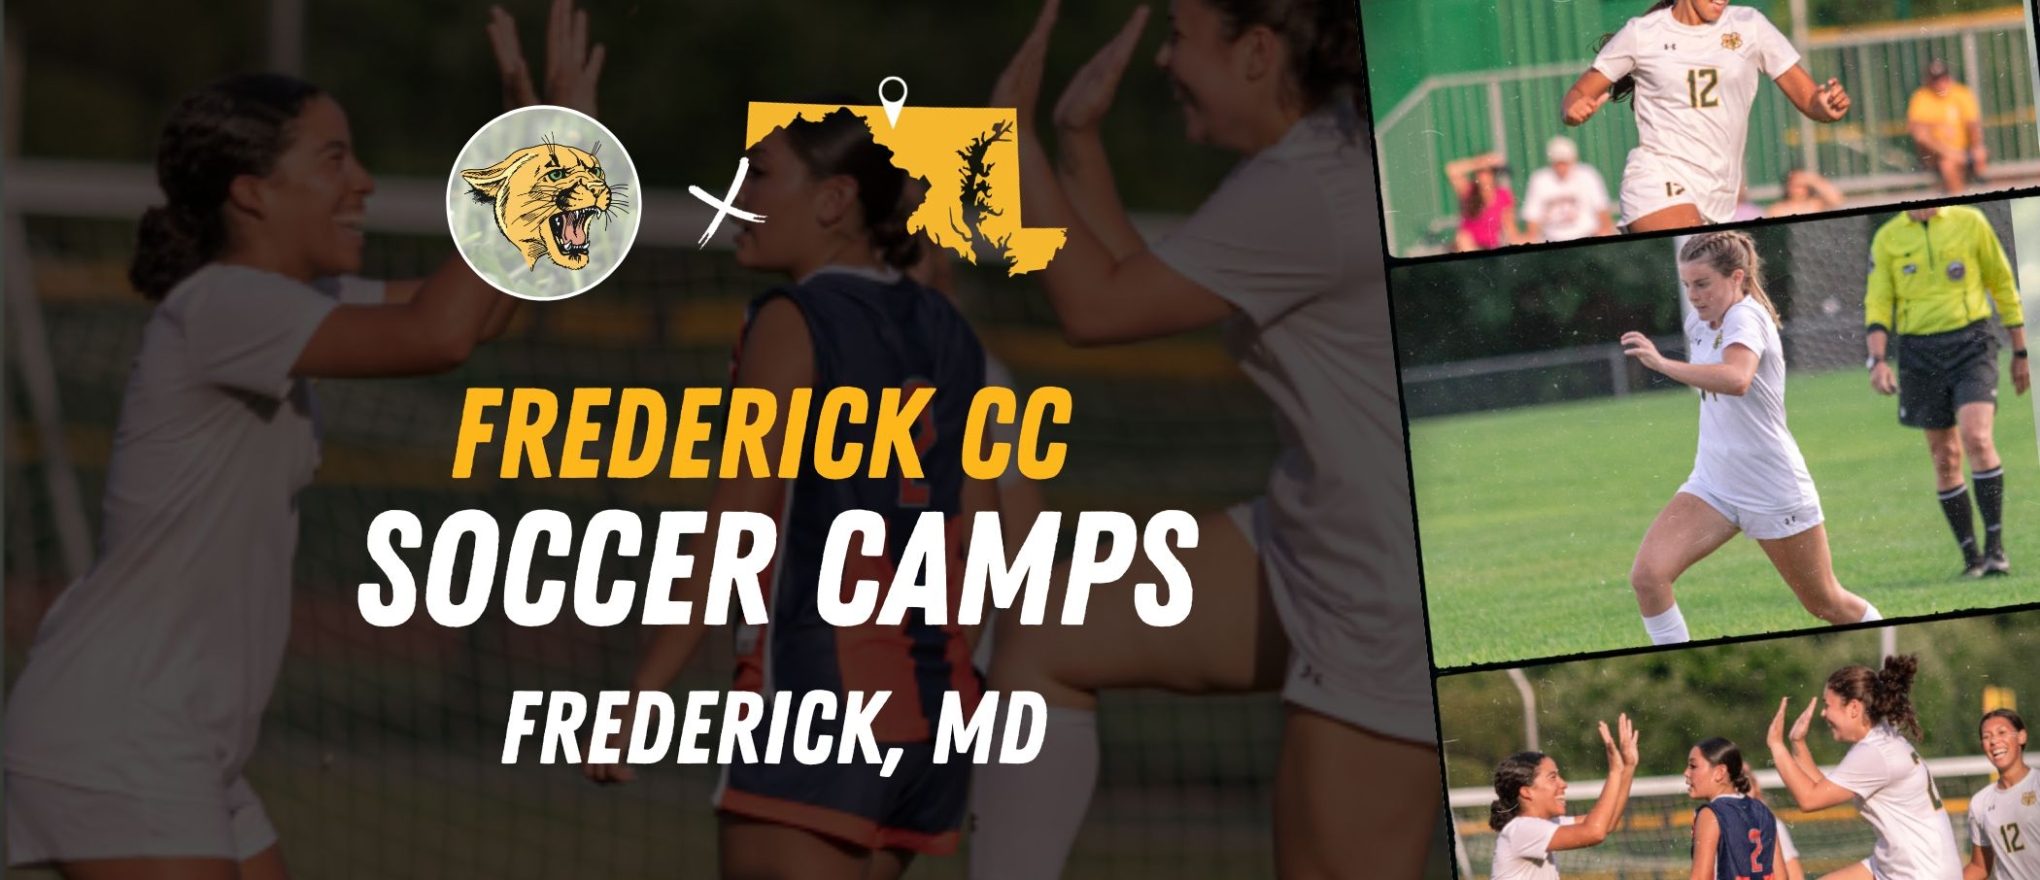 Frederick CC Soccer Camps